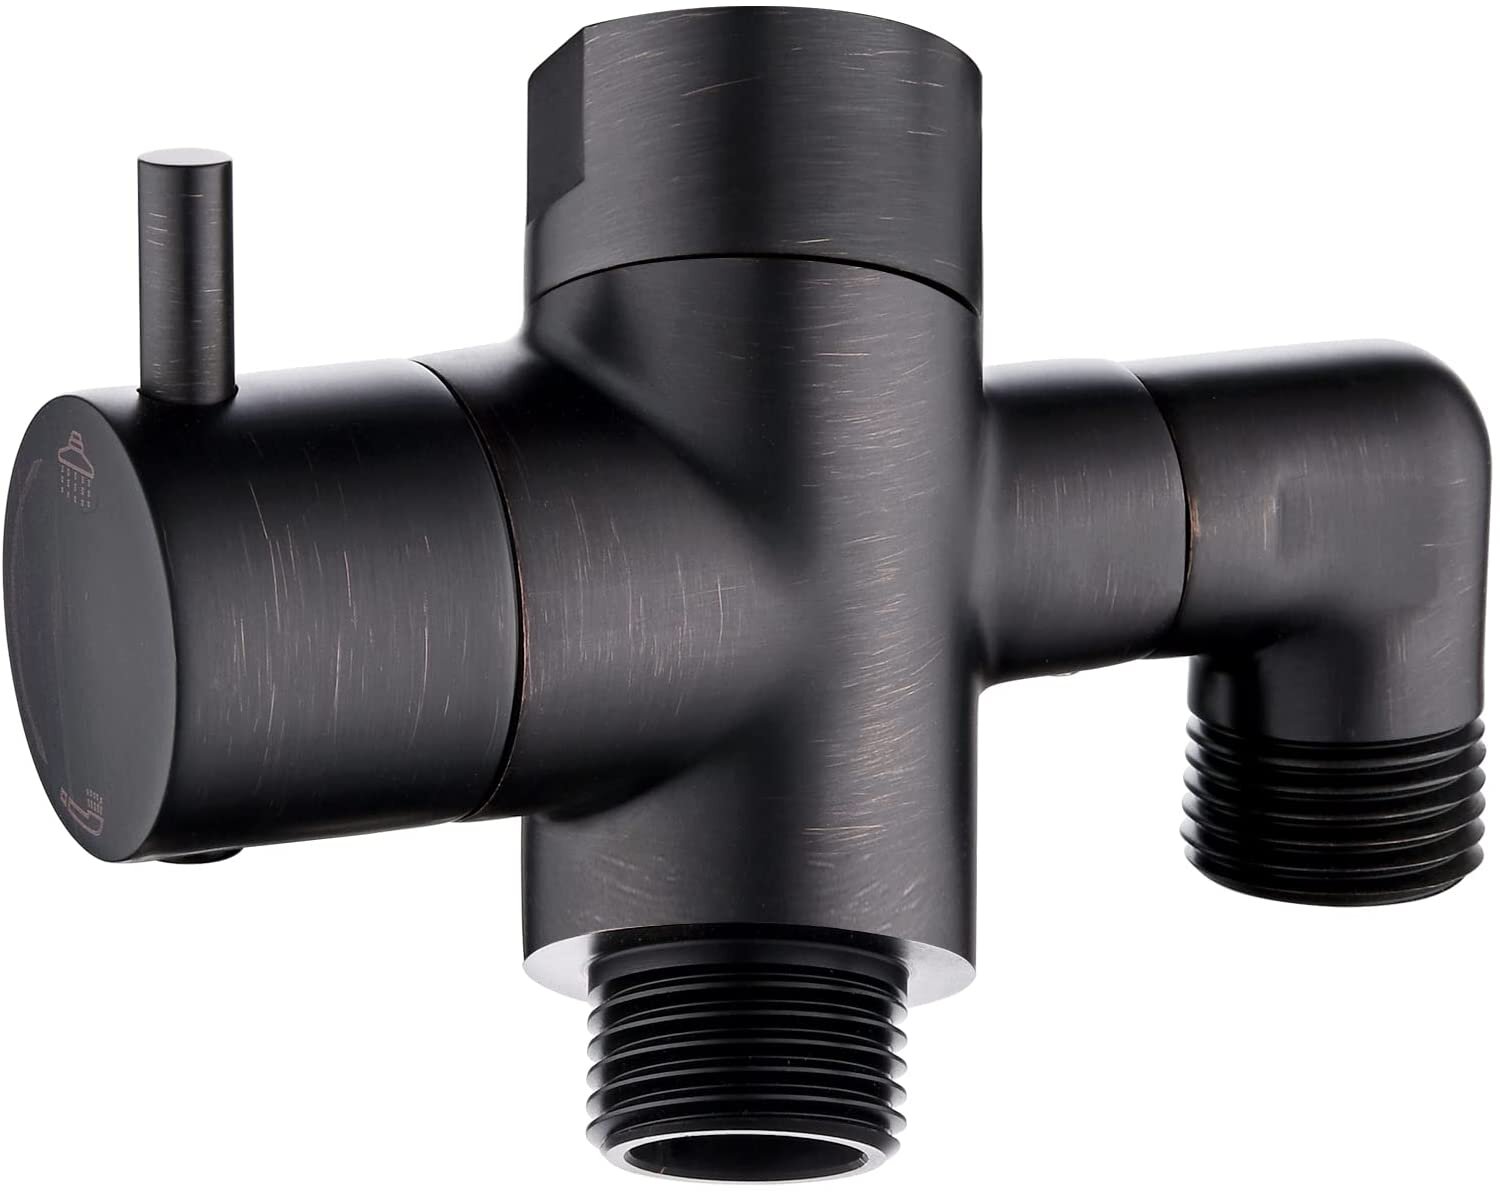 3-Way Diverter with Mount in Oil Rubbed Bronze Handheld shower bronze finish 